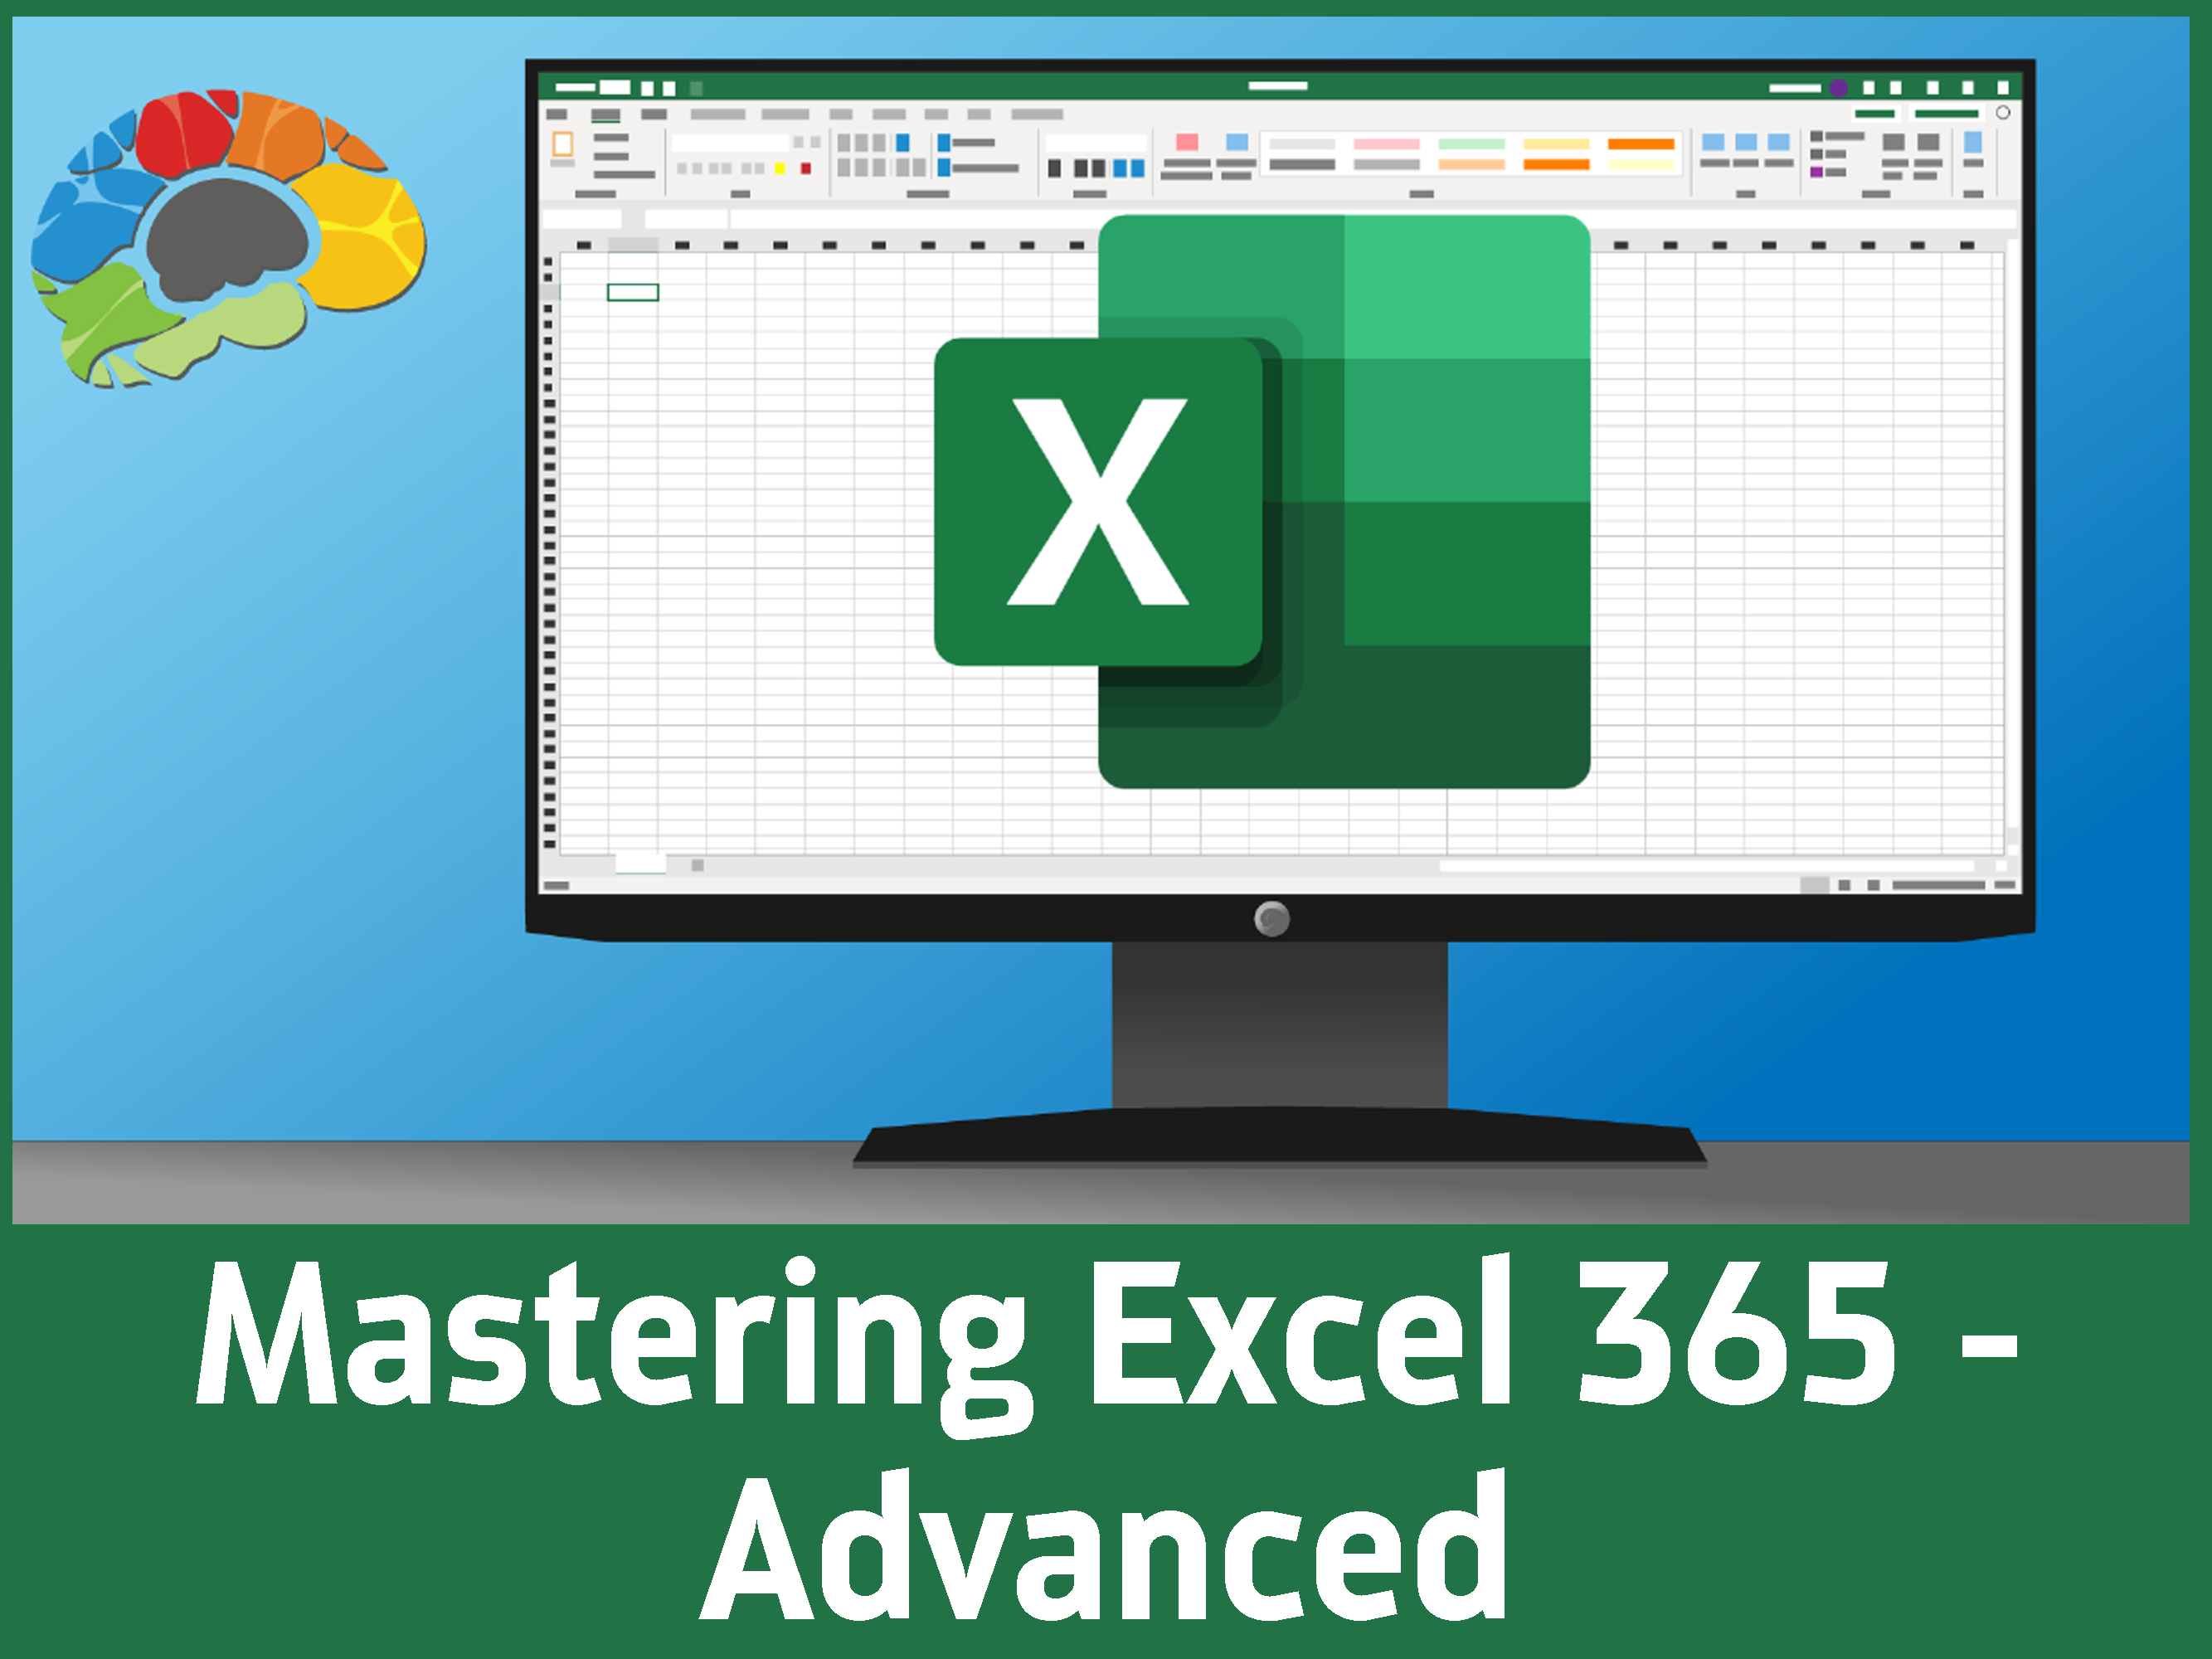 Mastering Excel 365 - Advanced